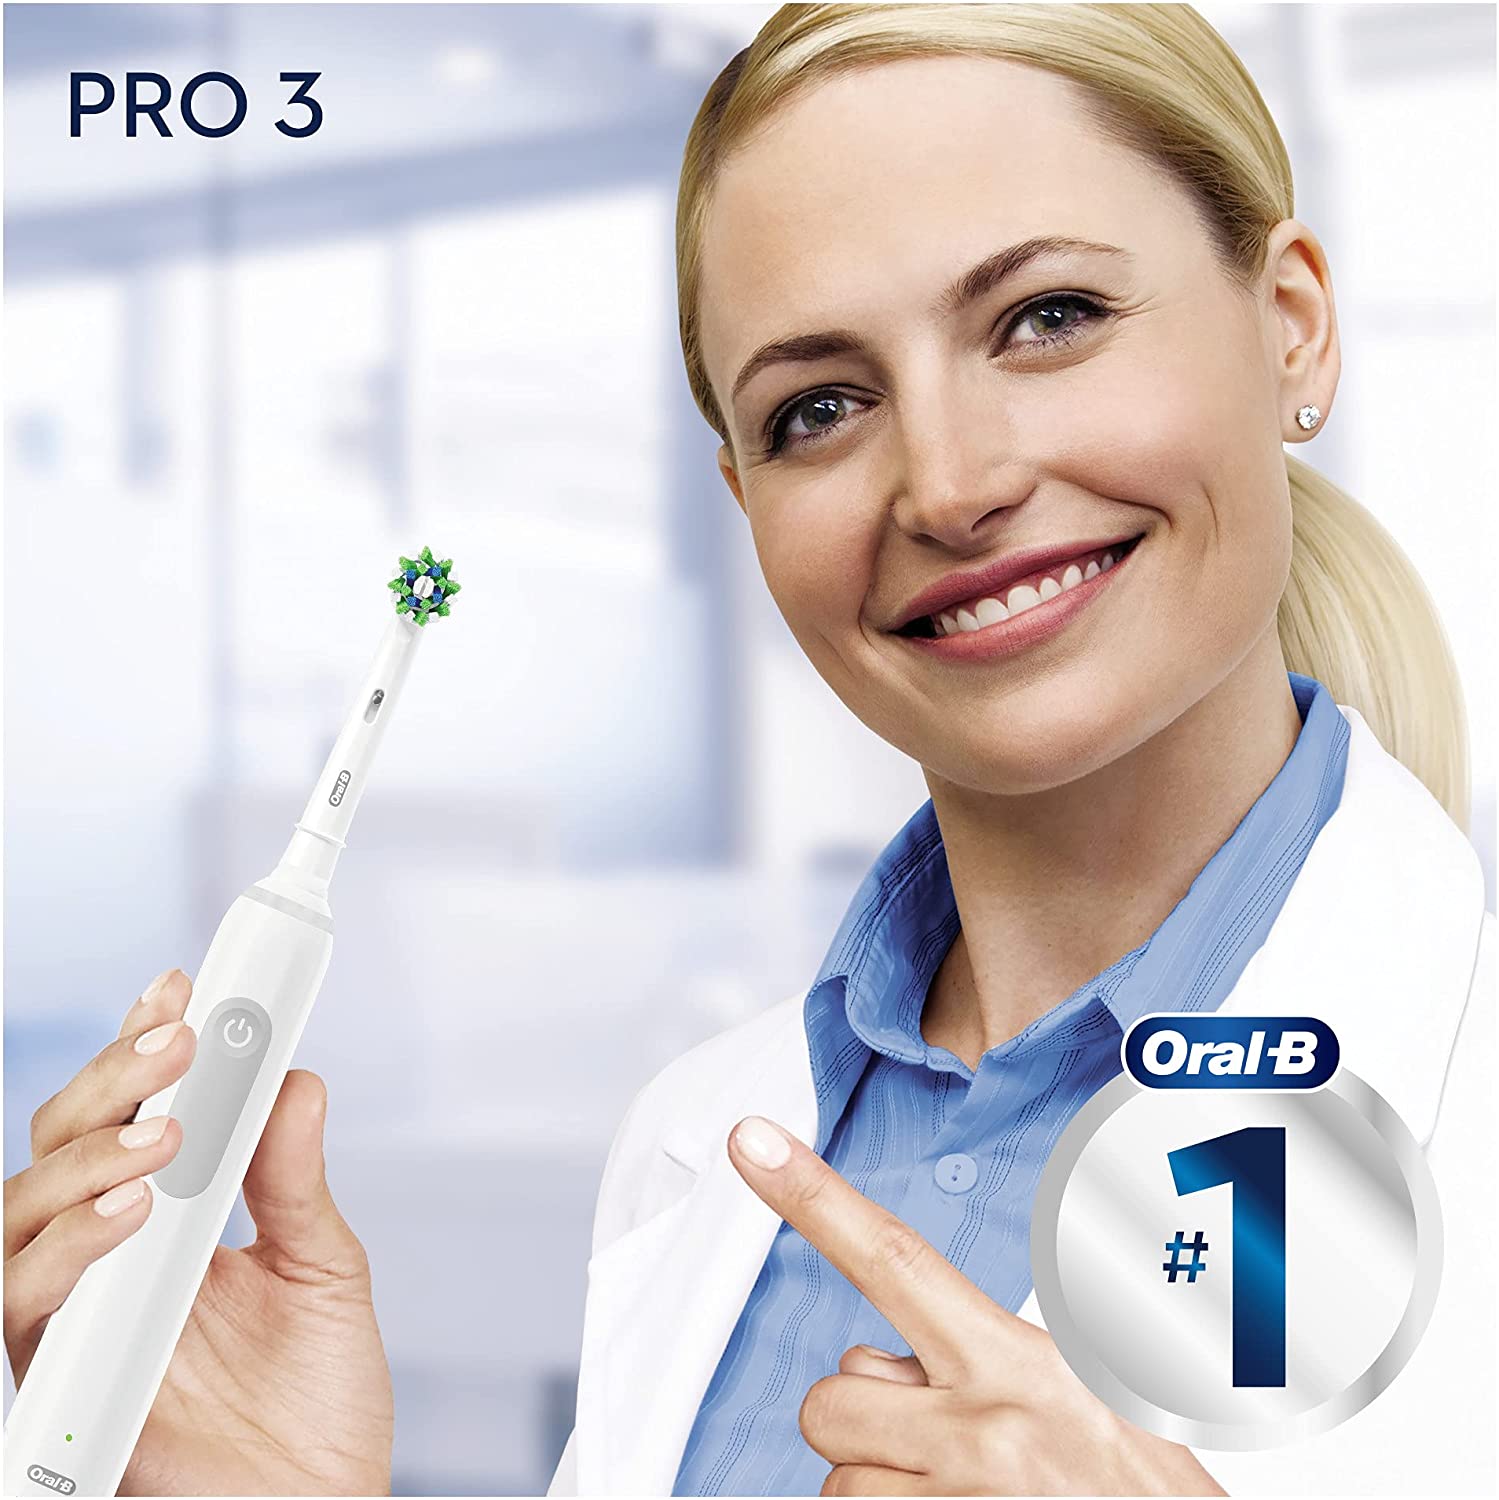 Oral-B Pro 3 - 3000 - White Electric Toothbrush, 1 Handle with Visible Pressure Sensor, 1 Toothbrush Head, Designed By Braun - Healthxpress.ie